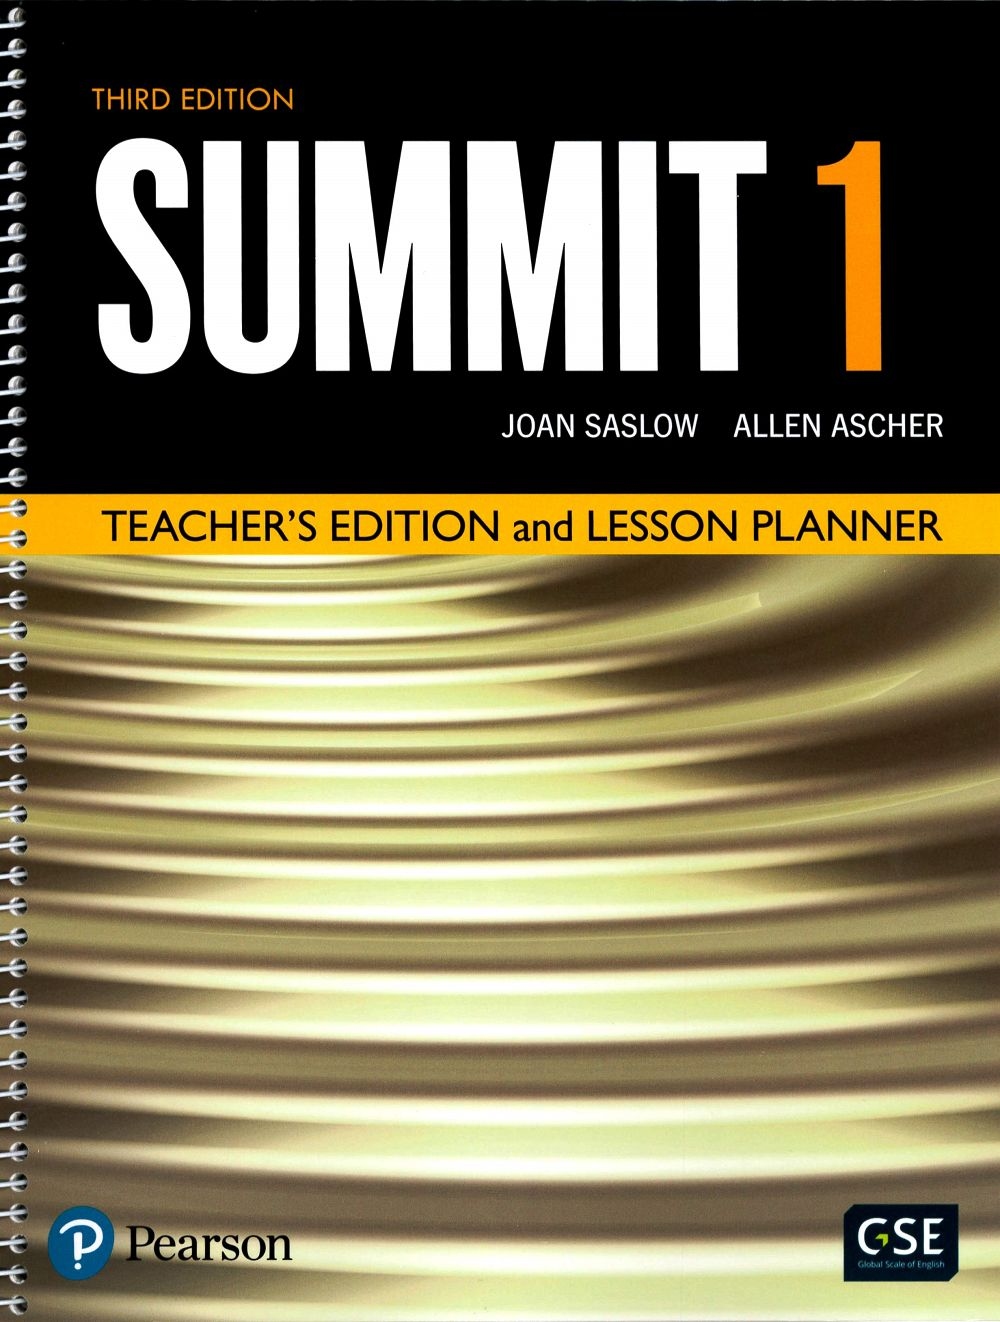 Summit 3/e (1) Teacher’s Edition and Lesson Planner